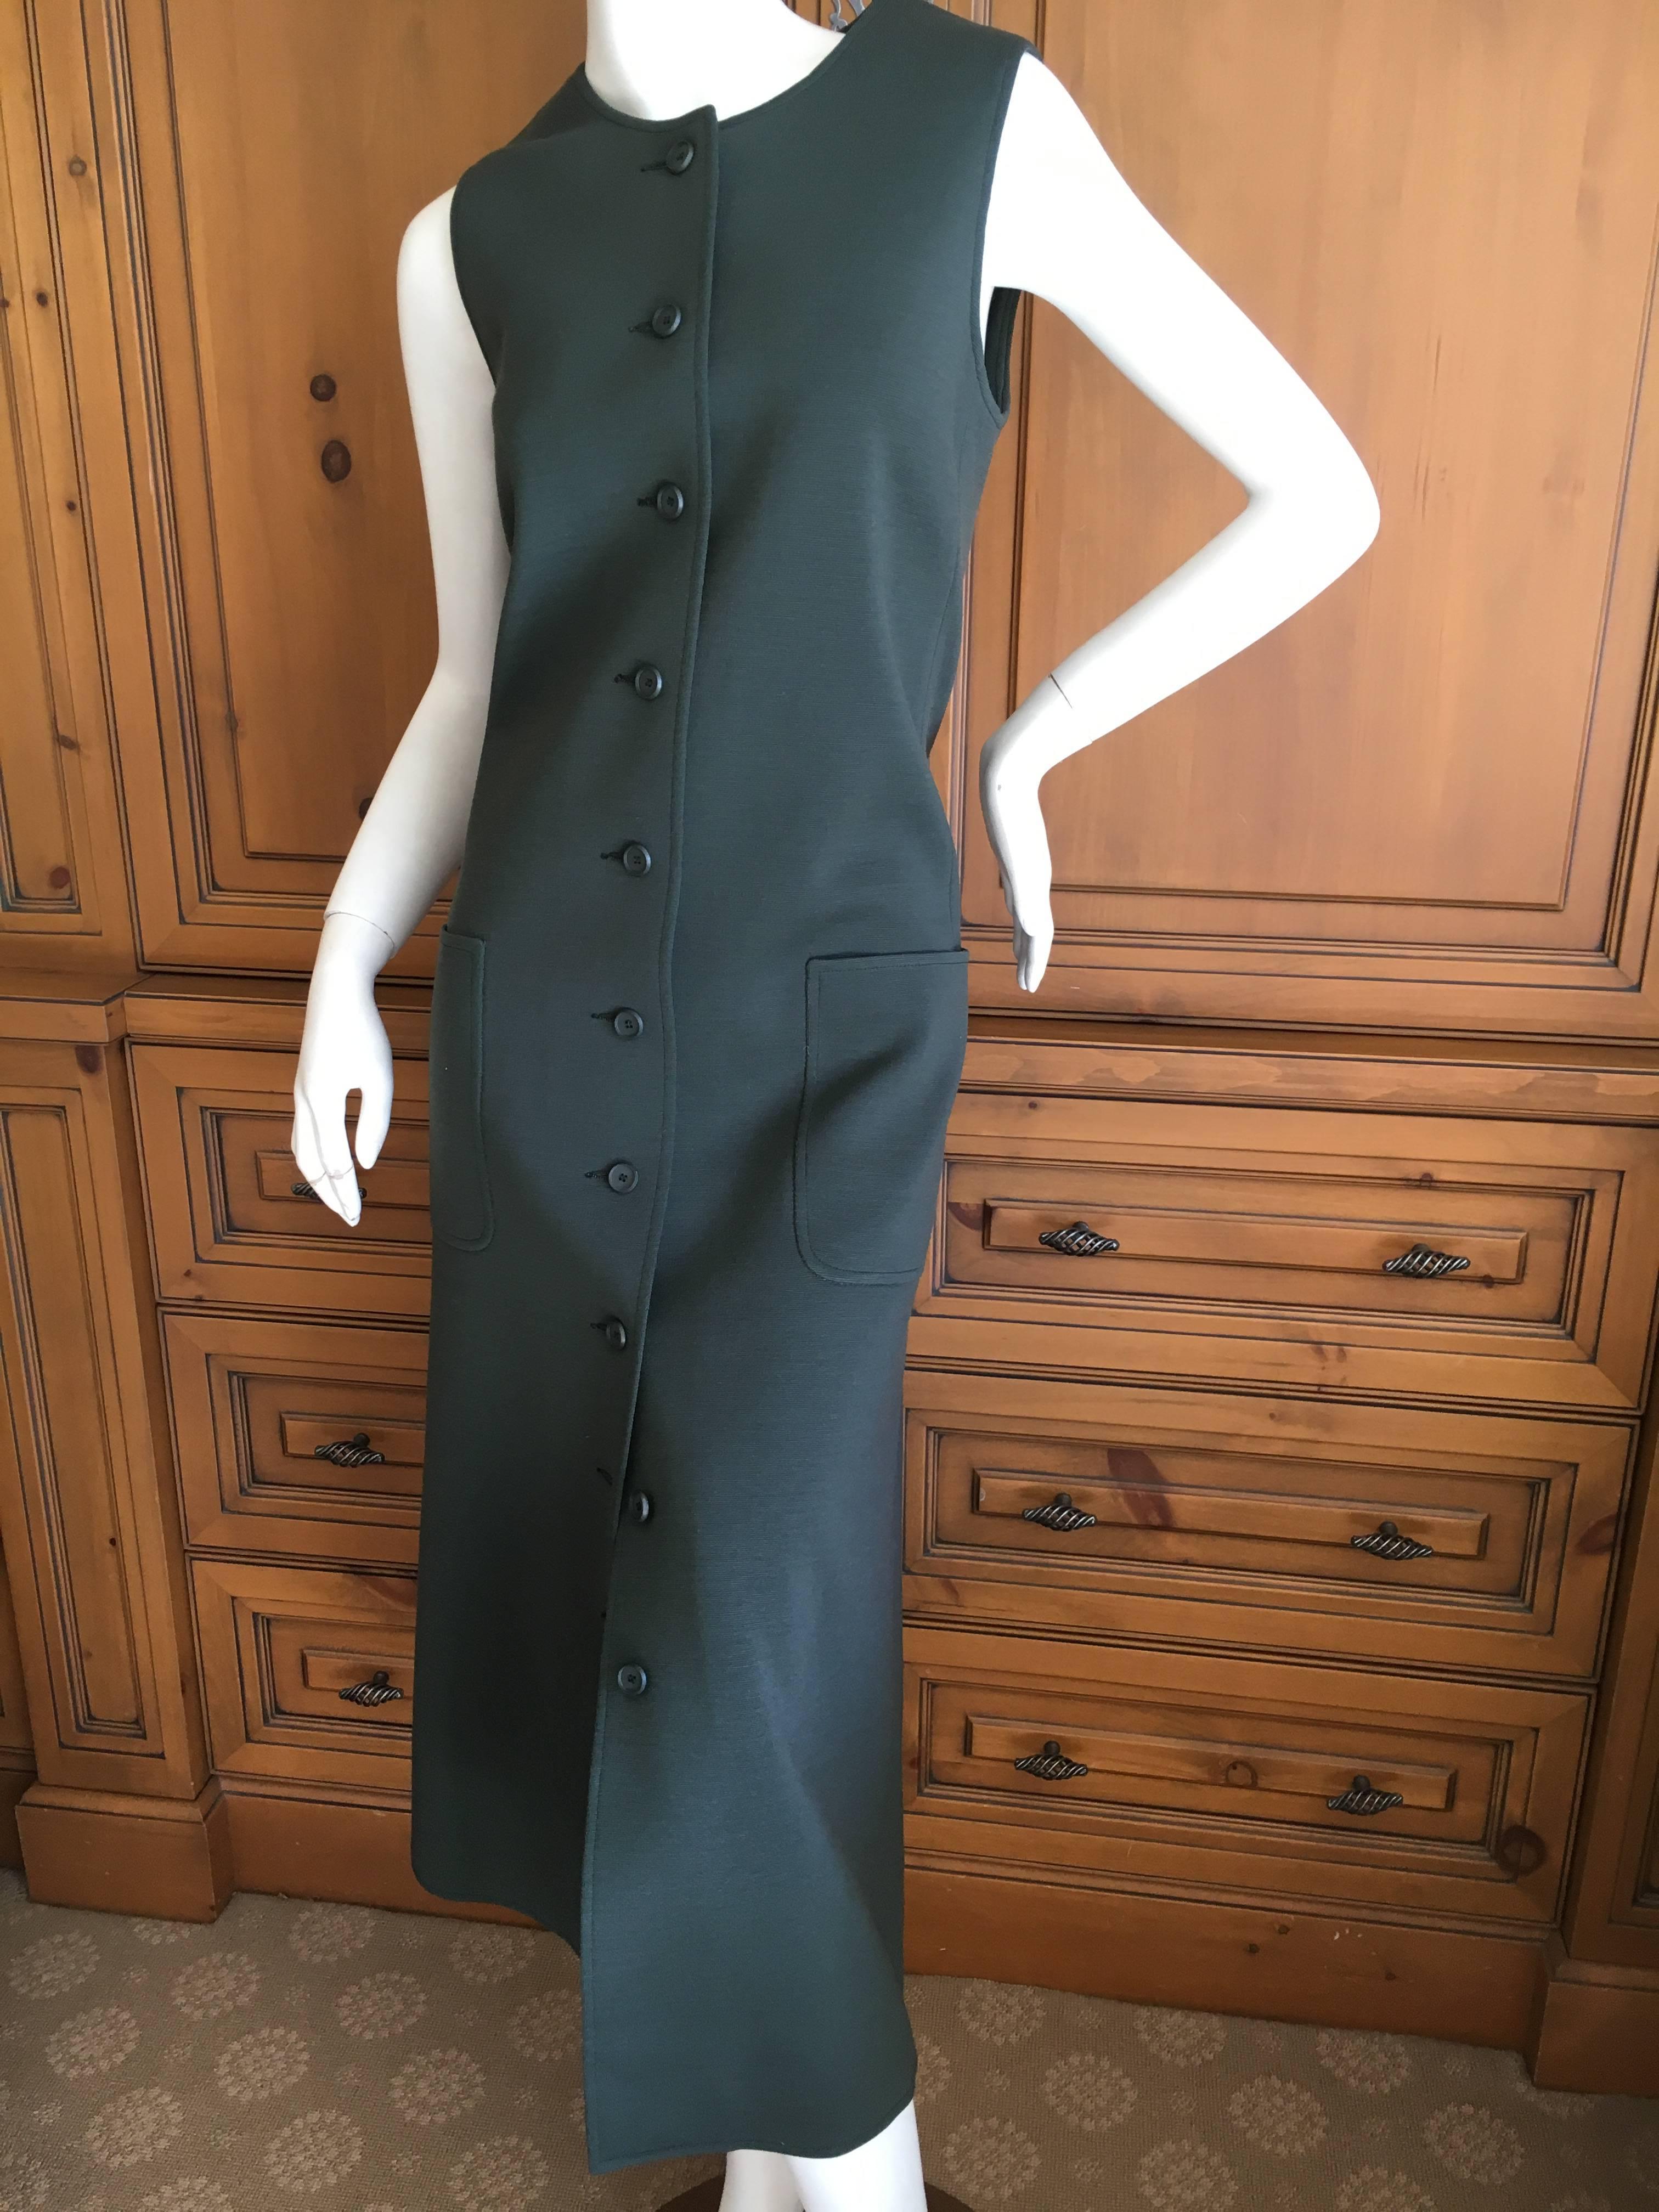 Yves Saint Laurent Early 1960's Olive Green Sleeveless Shift Dress In Excellent Condition For Sale In Cloverdale, CA